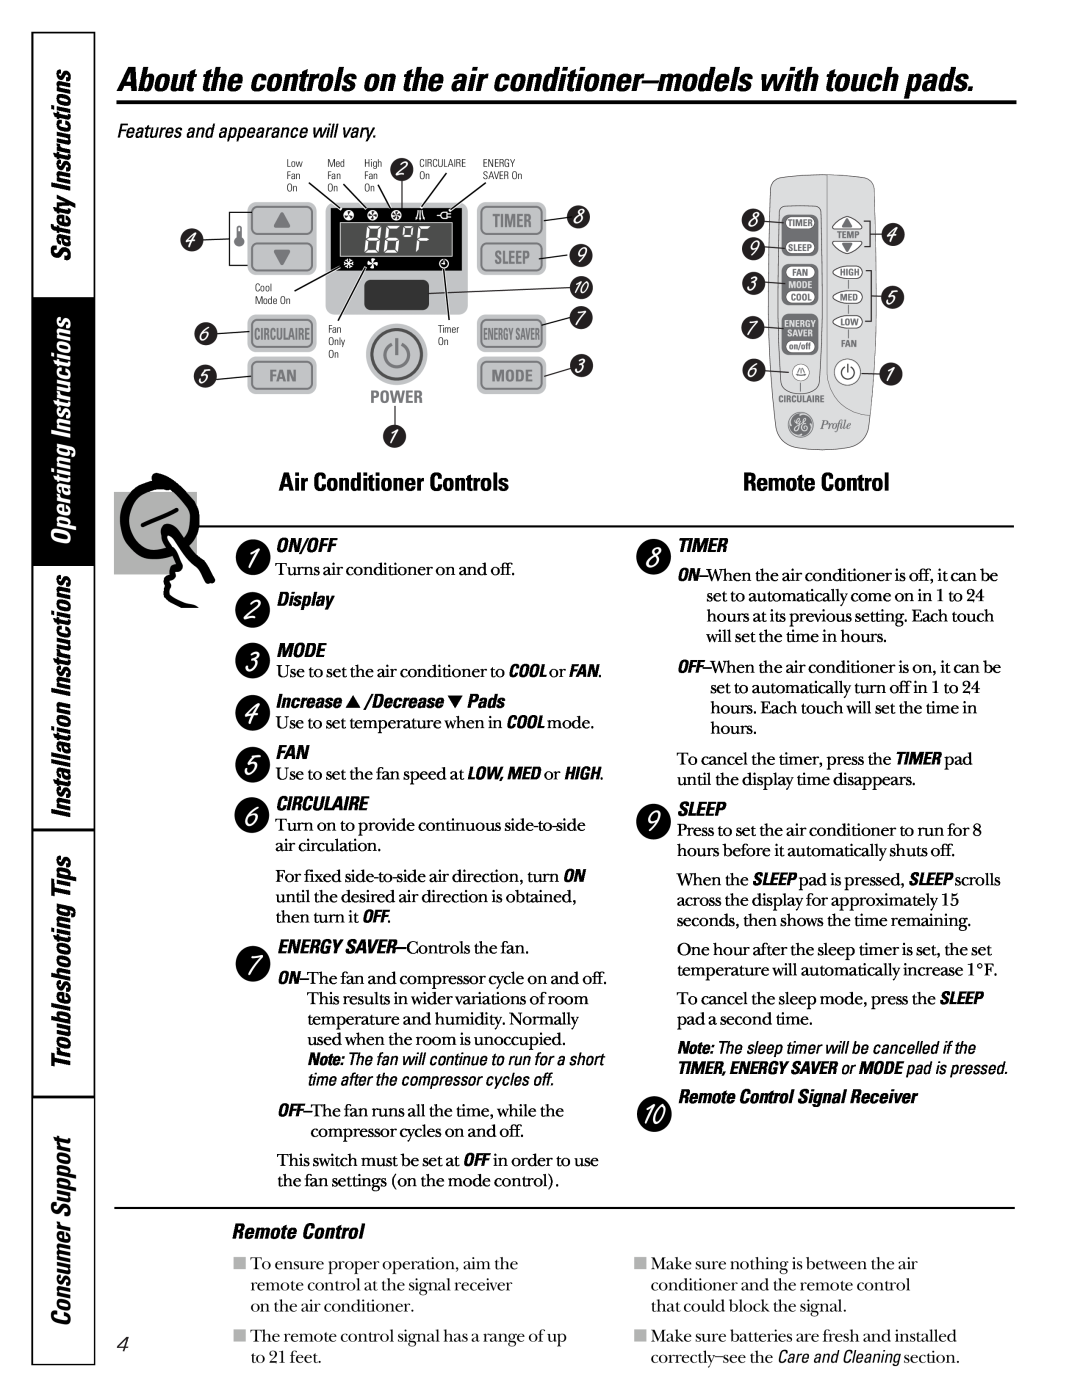 GE ASP08 Operating Instructions Safety Instructions, Support Troubleshooting Tips, Installation Instructions, Consumer 